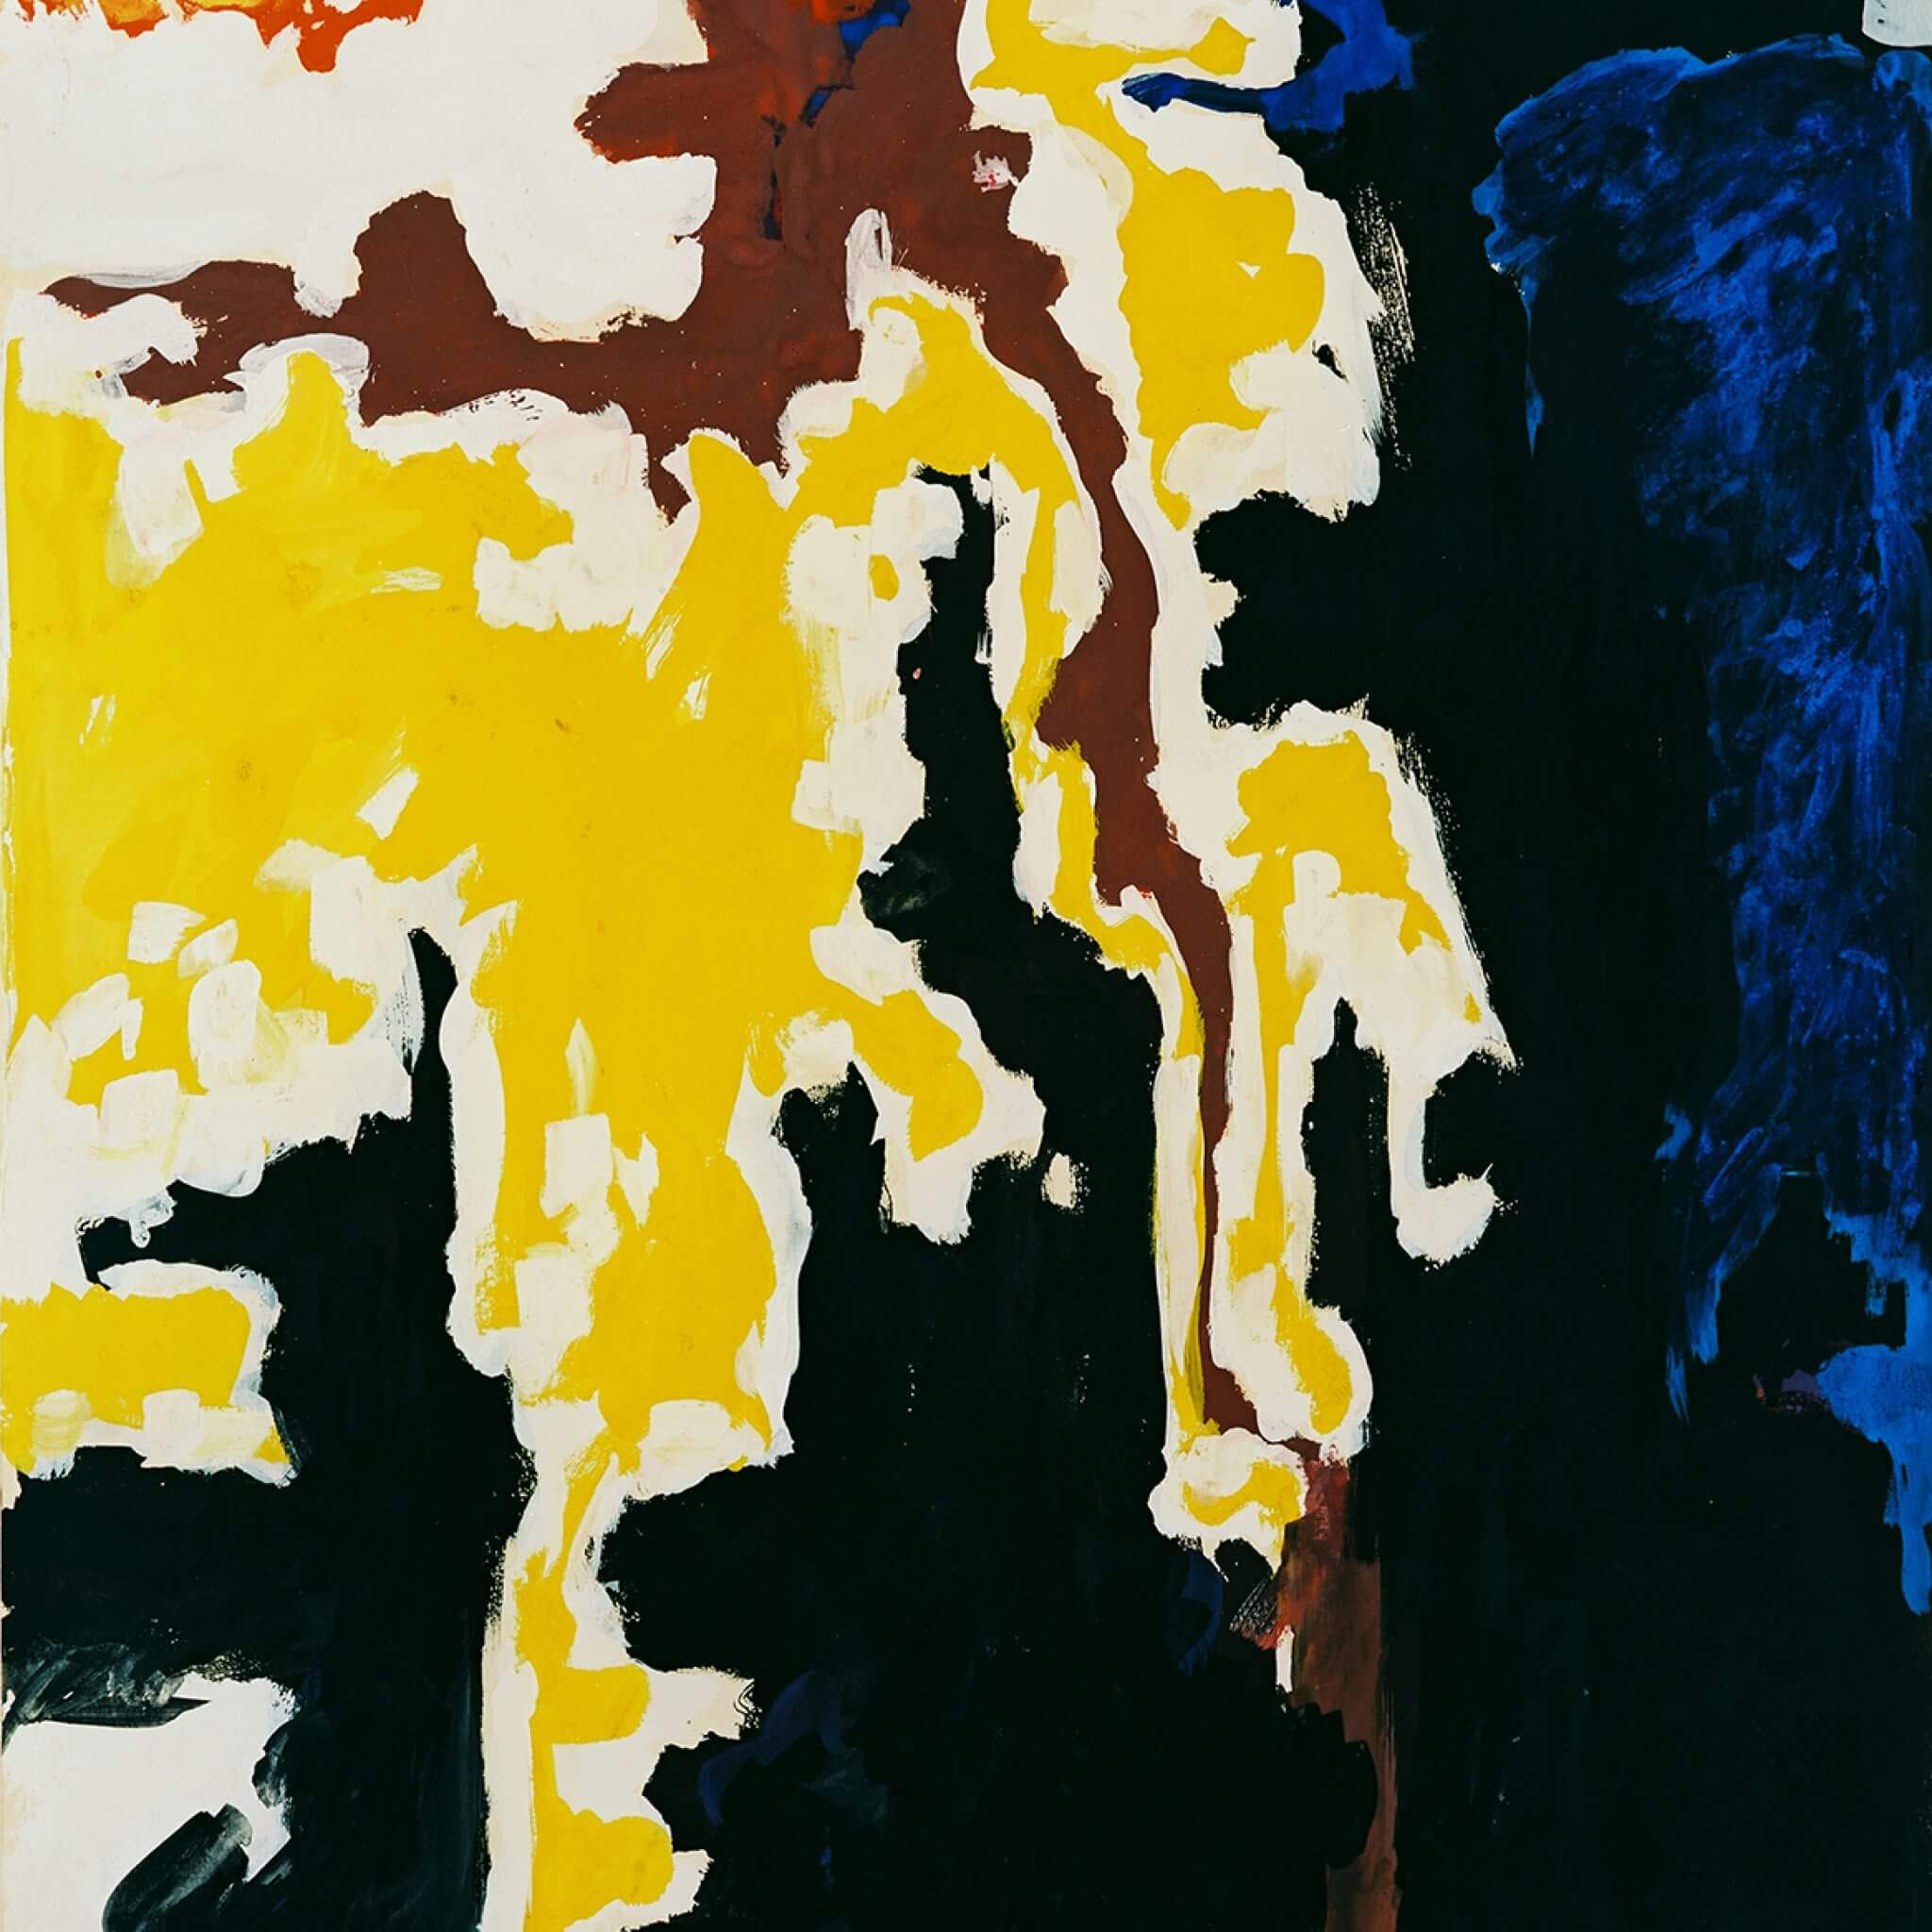 Abstract gouache on paper with black, yellow, green, brown, blue, red and orange paint